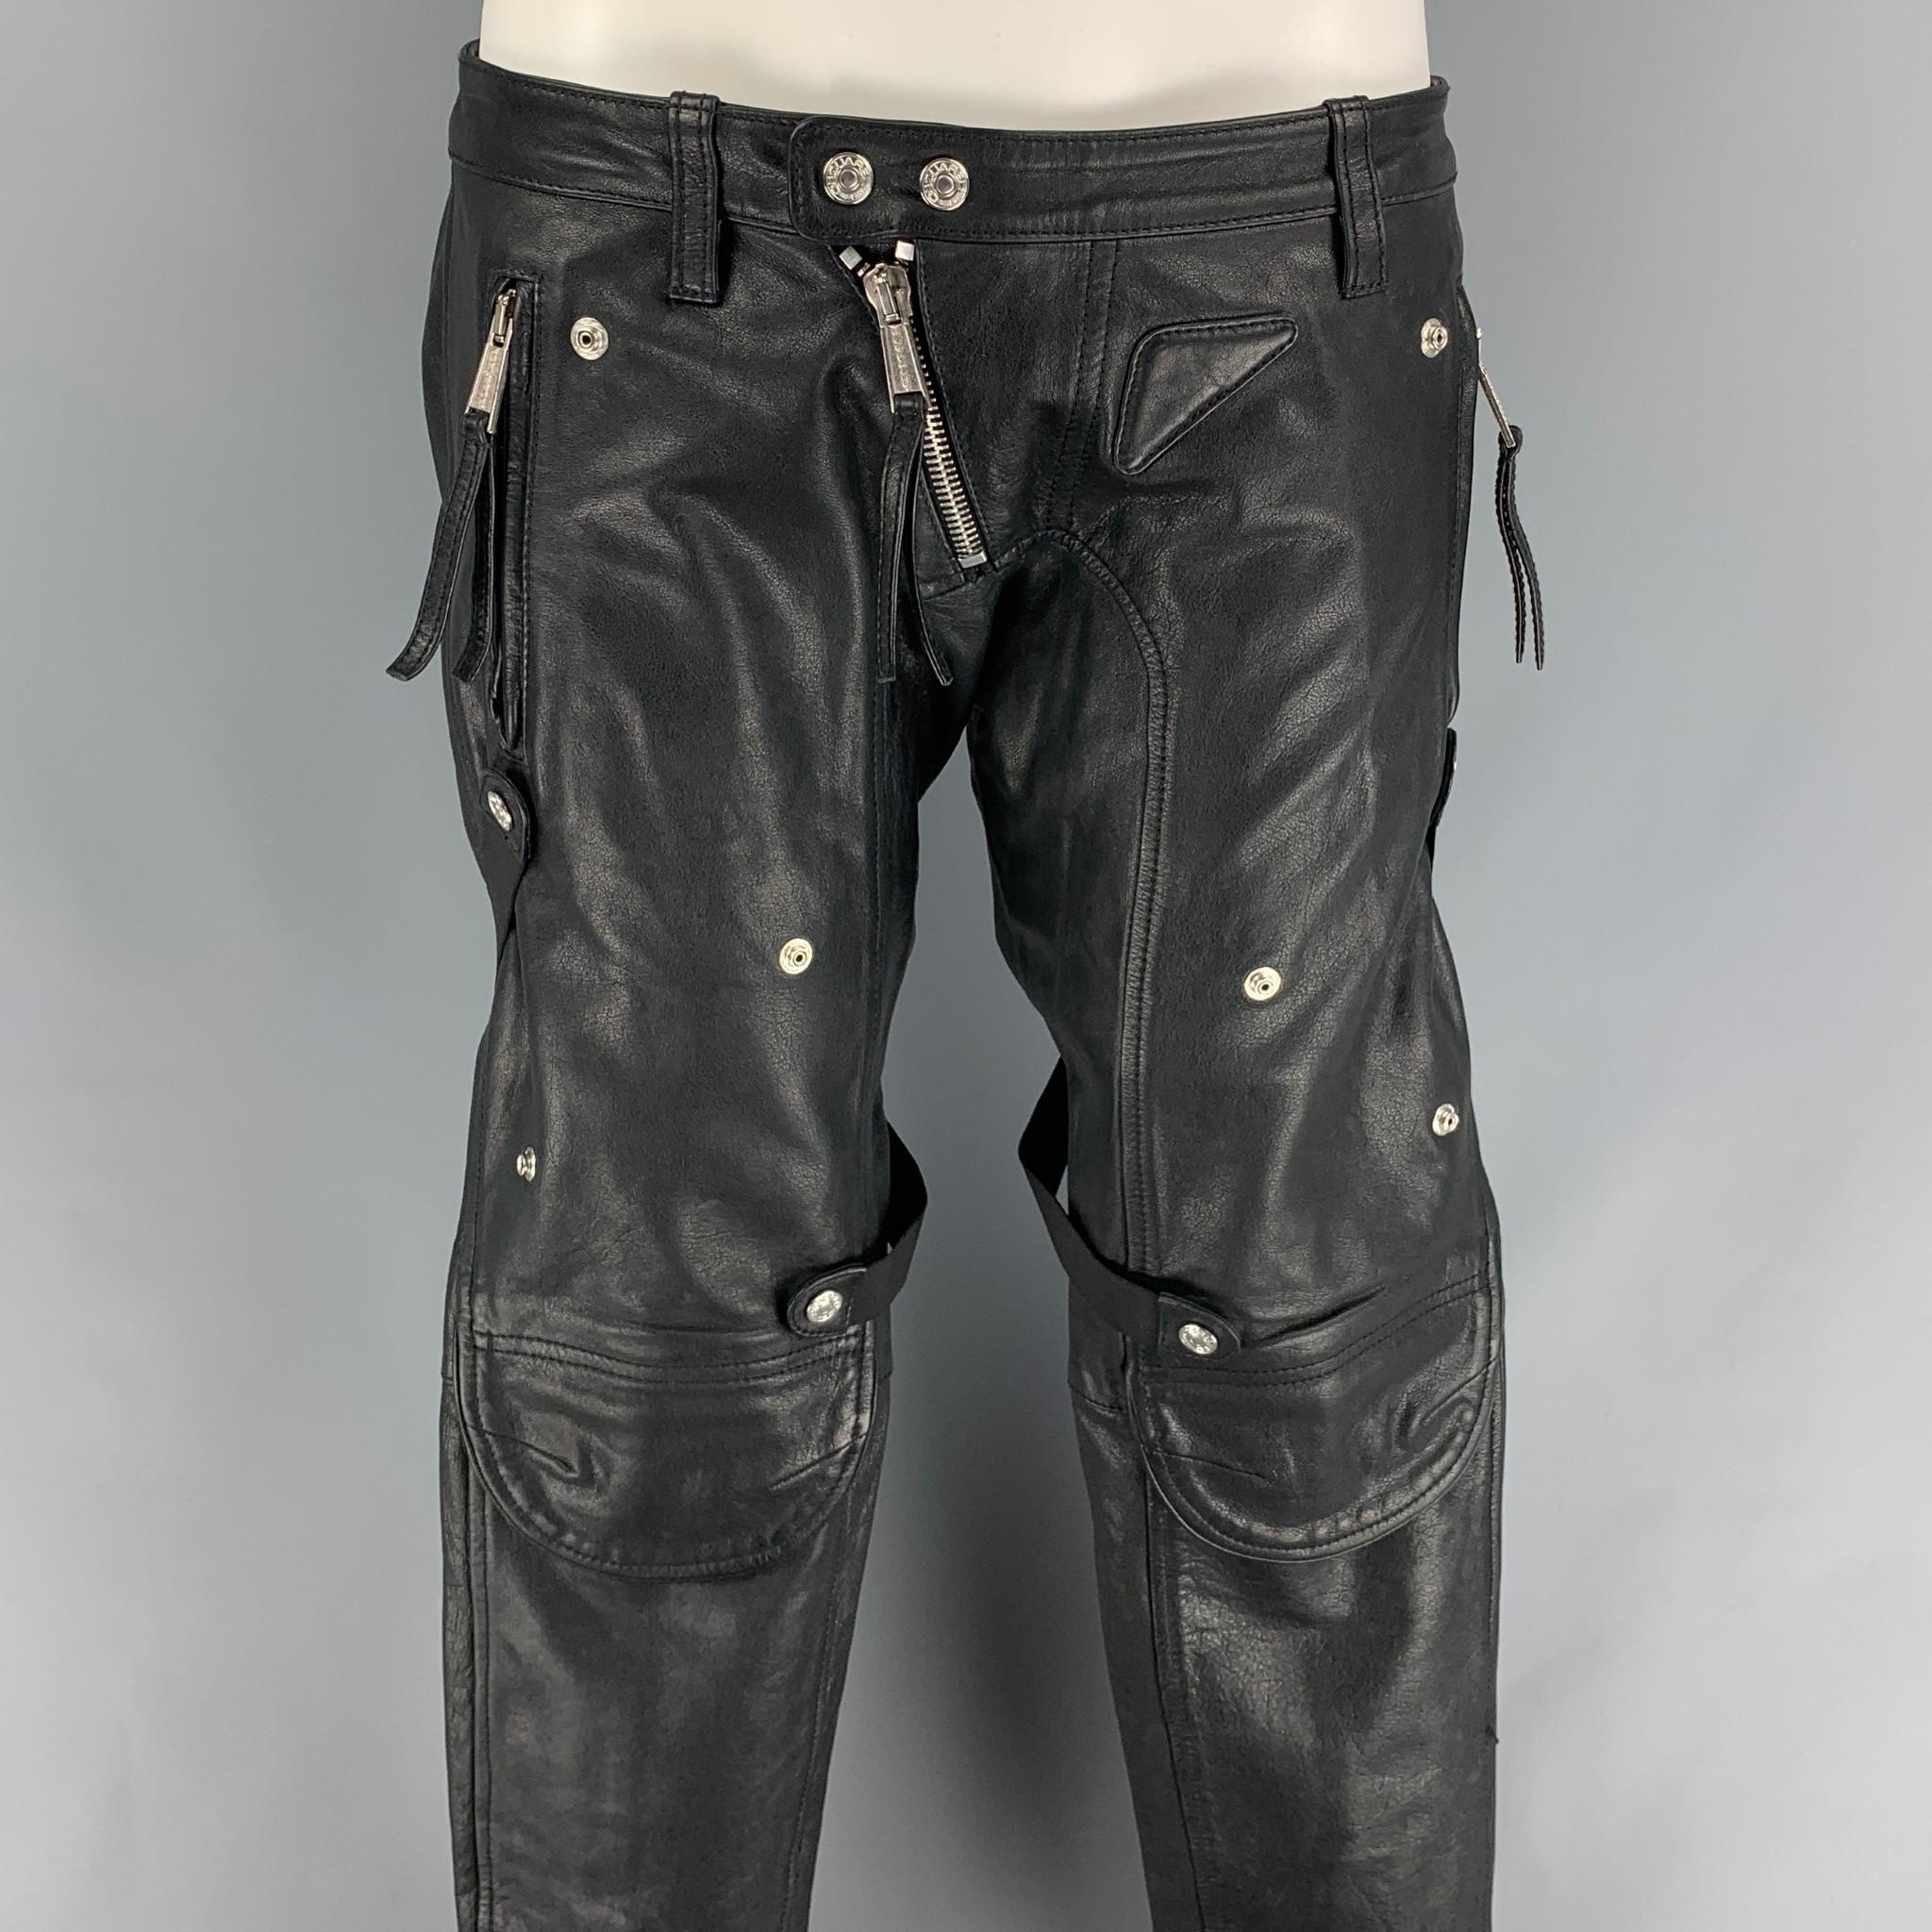 DSQUARED2 pants comes in a black leather featuring a skinny fit, low rise, zipper details, bondage straps, snap button details, zip fly, and a double snap button closure. Made in Romania. 

Very Good Pre-Owned Condition.
Marked: